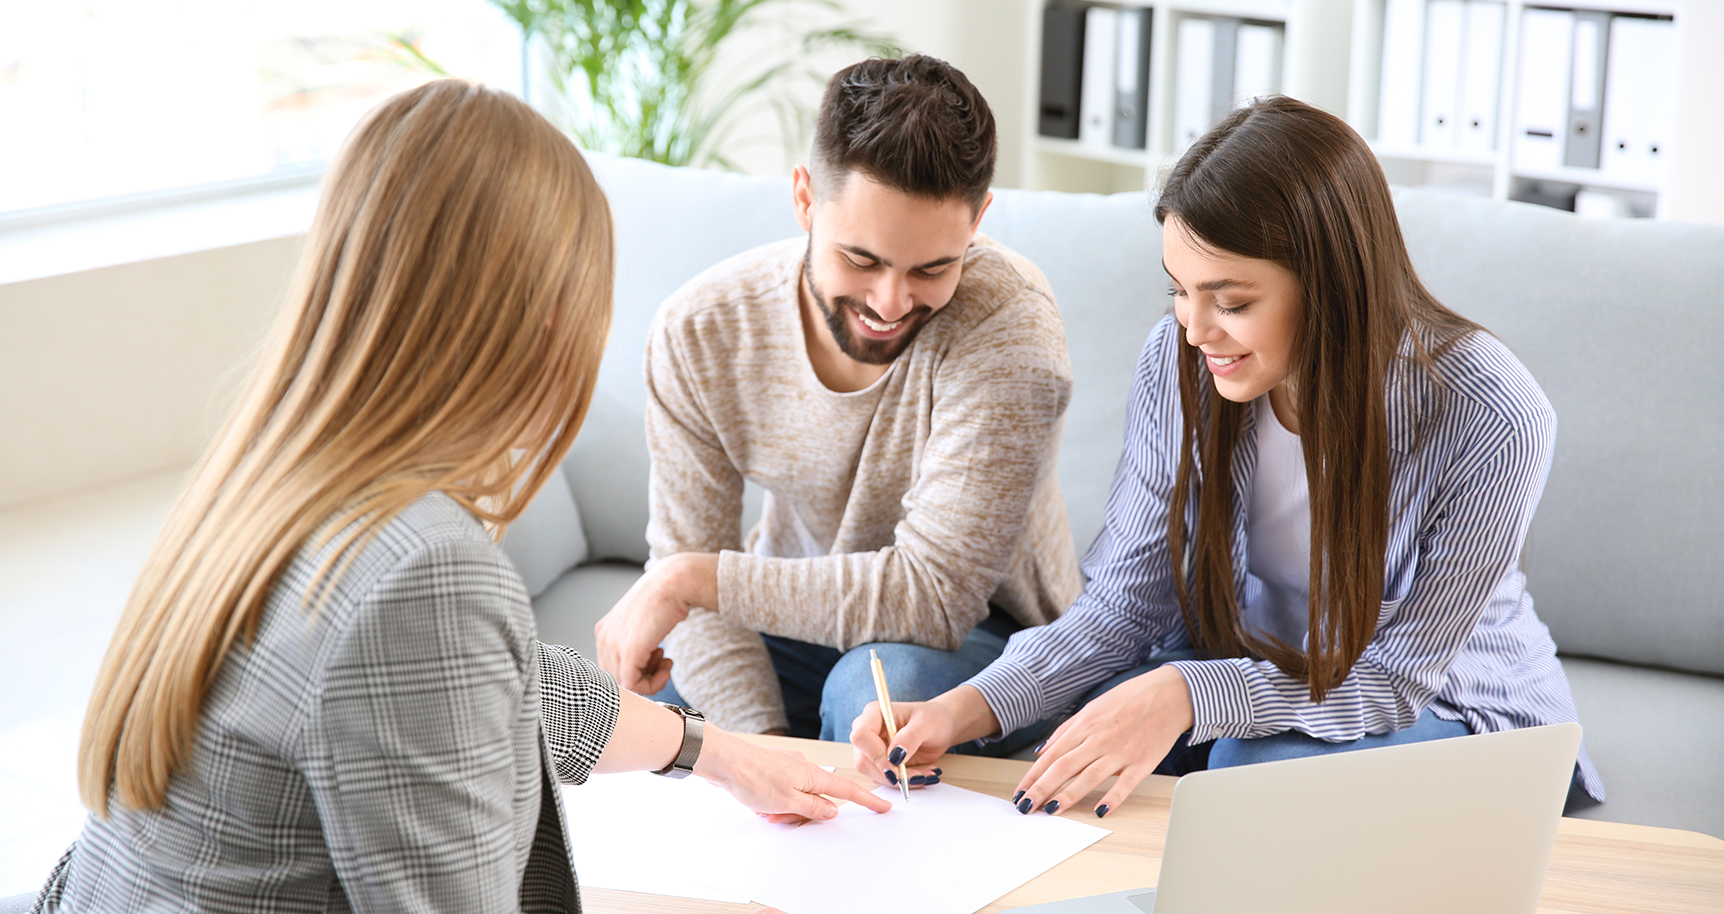 If you're in the market for a loan, learning about the various types of financing available can make your lending decision easier.